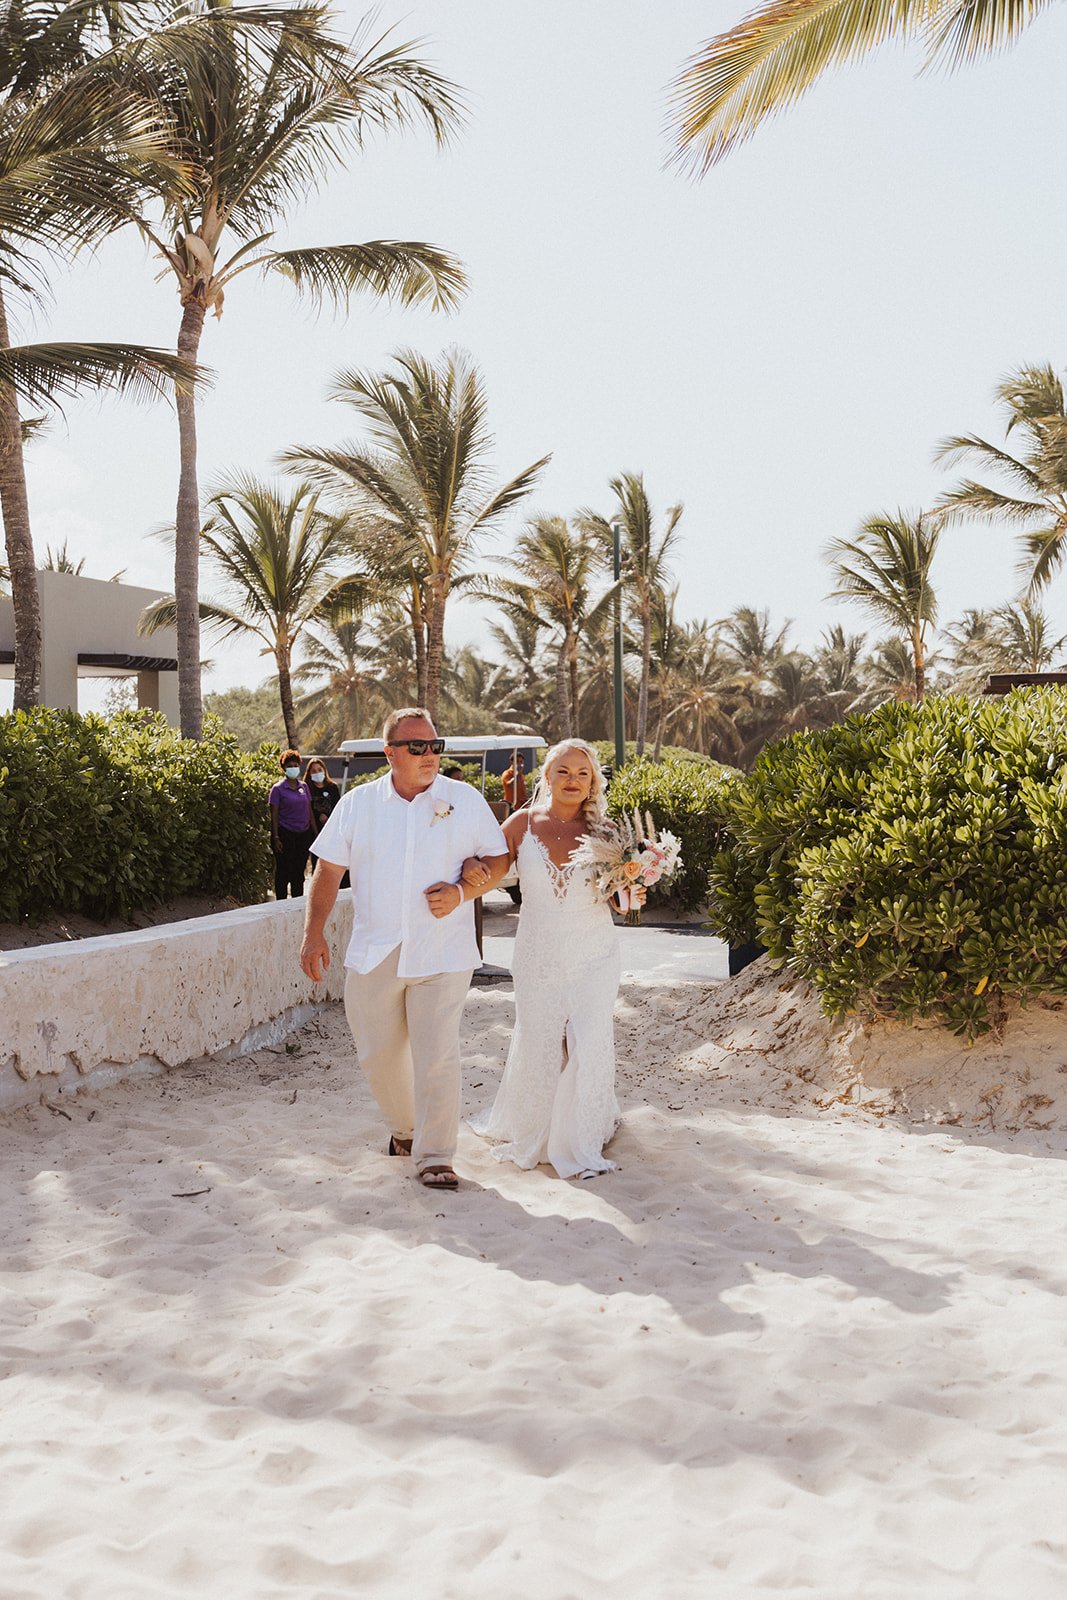  A loved one walking a bride down the beach wearing Anais Anette ‘Emmanuelle wedding dress for a lovely destination tropical wedding celebration 